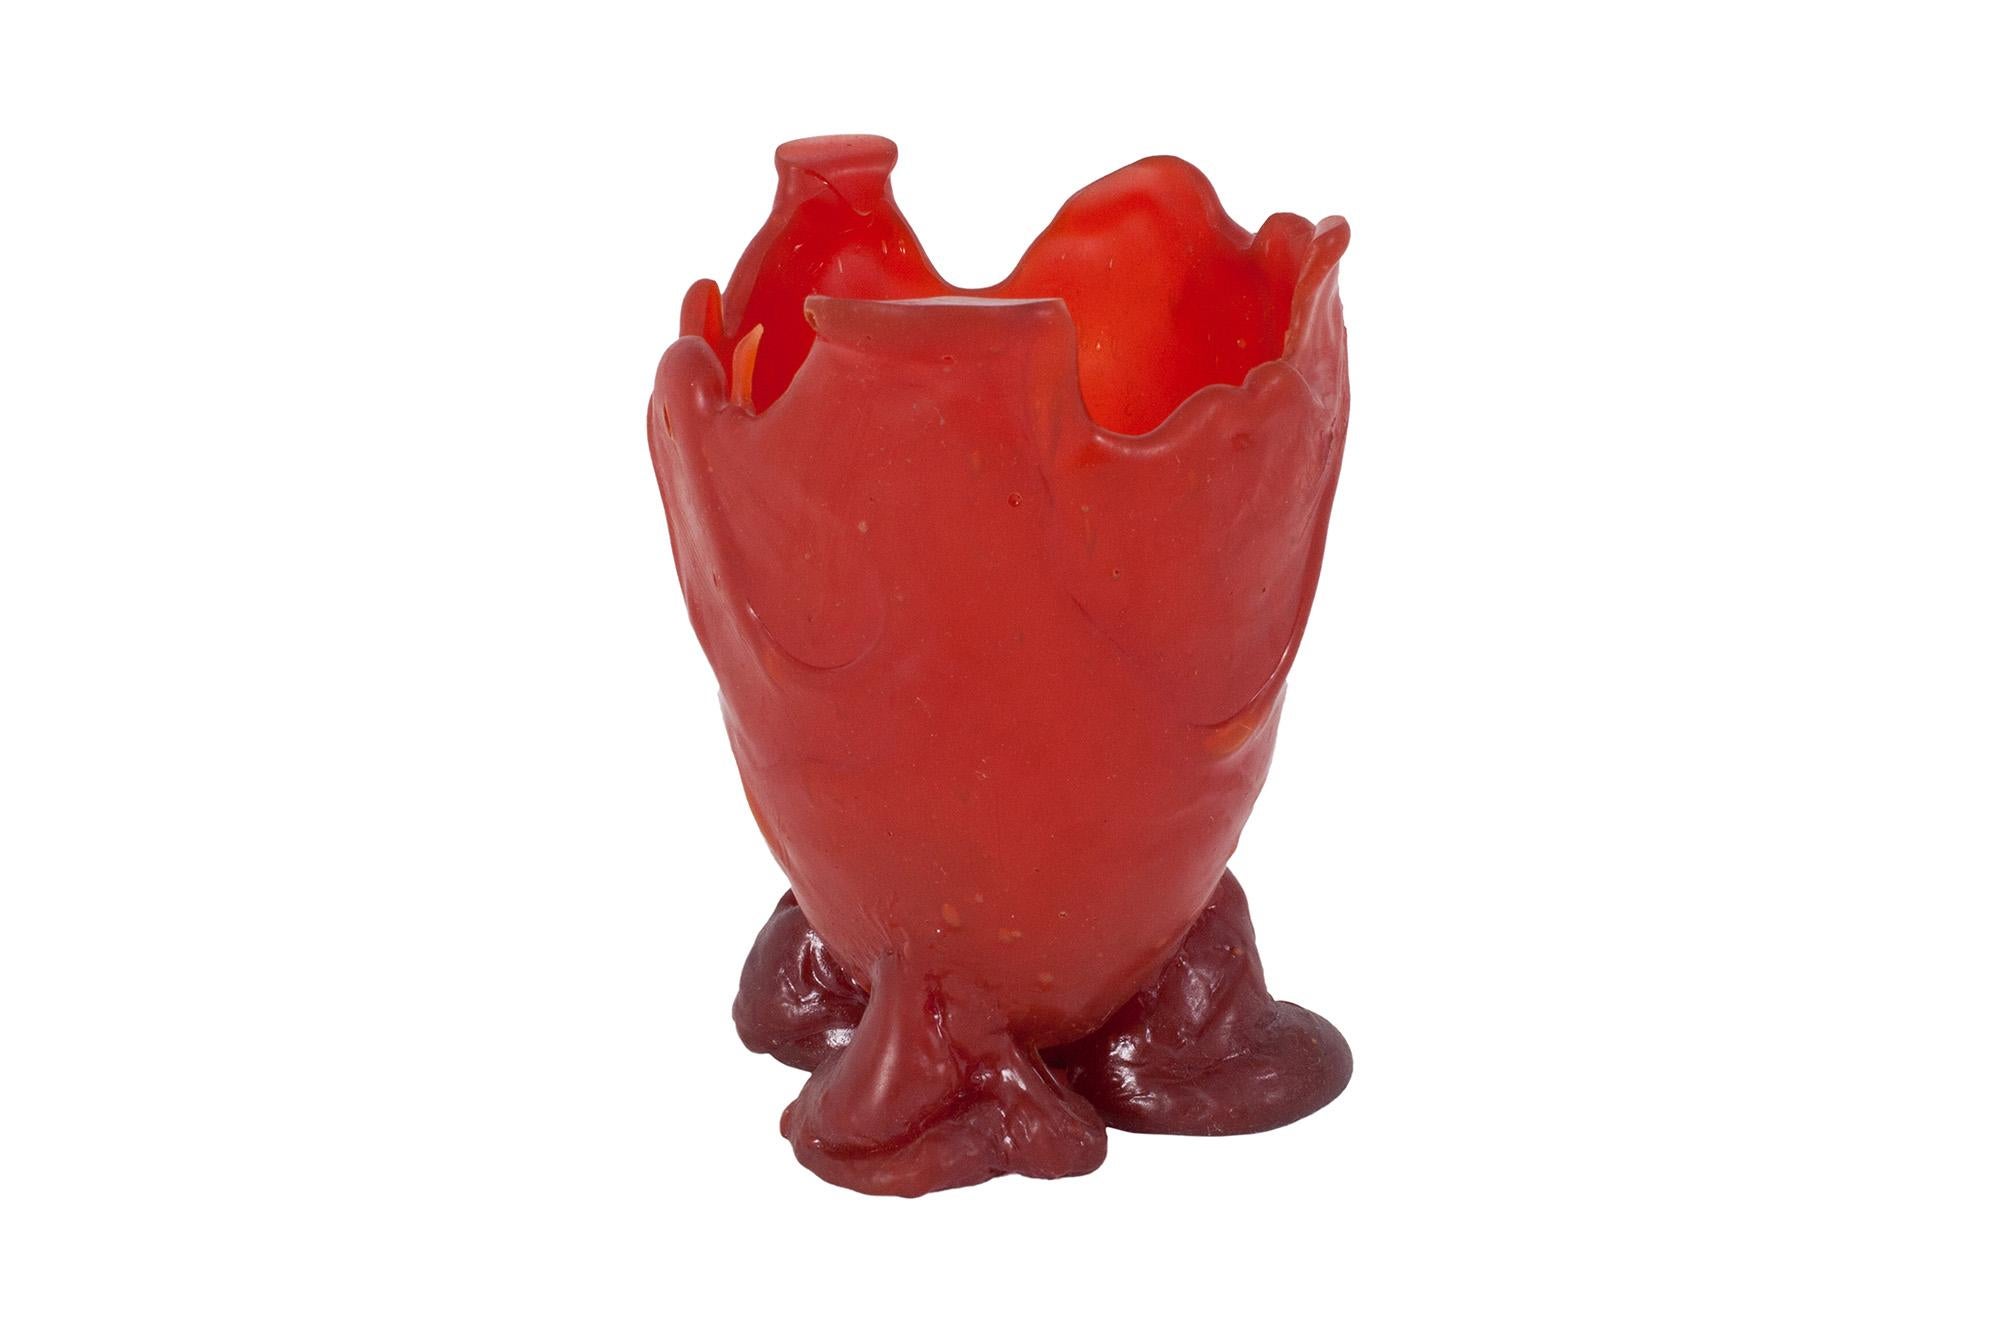 Resin vase designed by architect / designer Gaetano Pesce. The vessel stands on three small legs. The body of the vessel is created by different casted layers of resin in bright red, creating a very beautiful and playful aesthetic appearance.